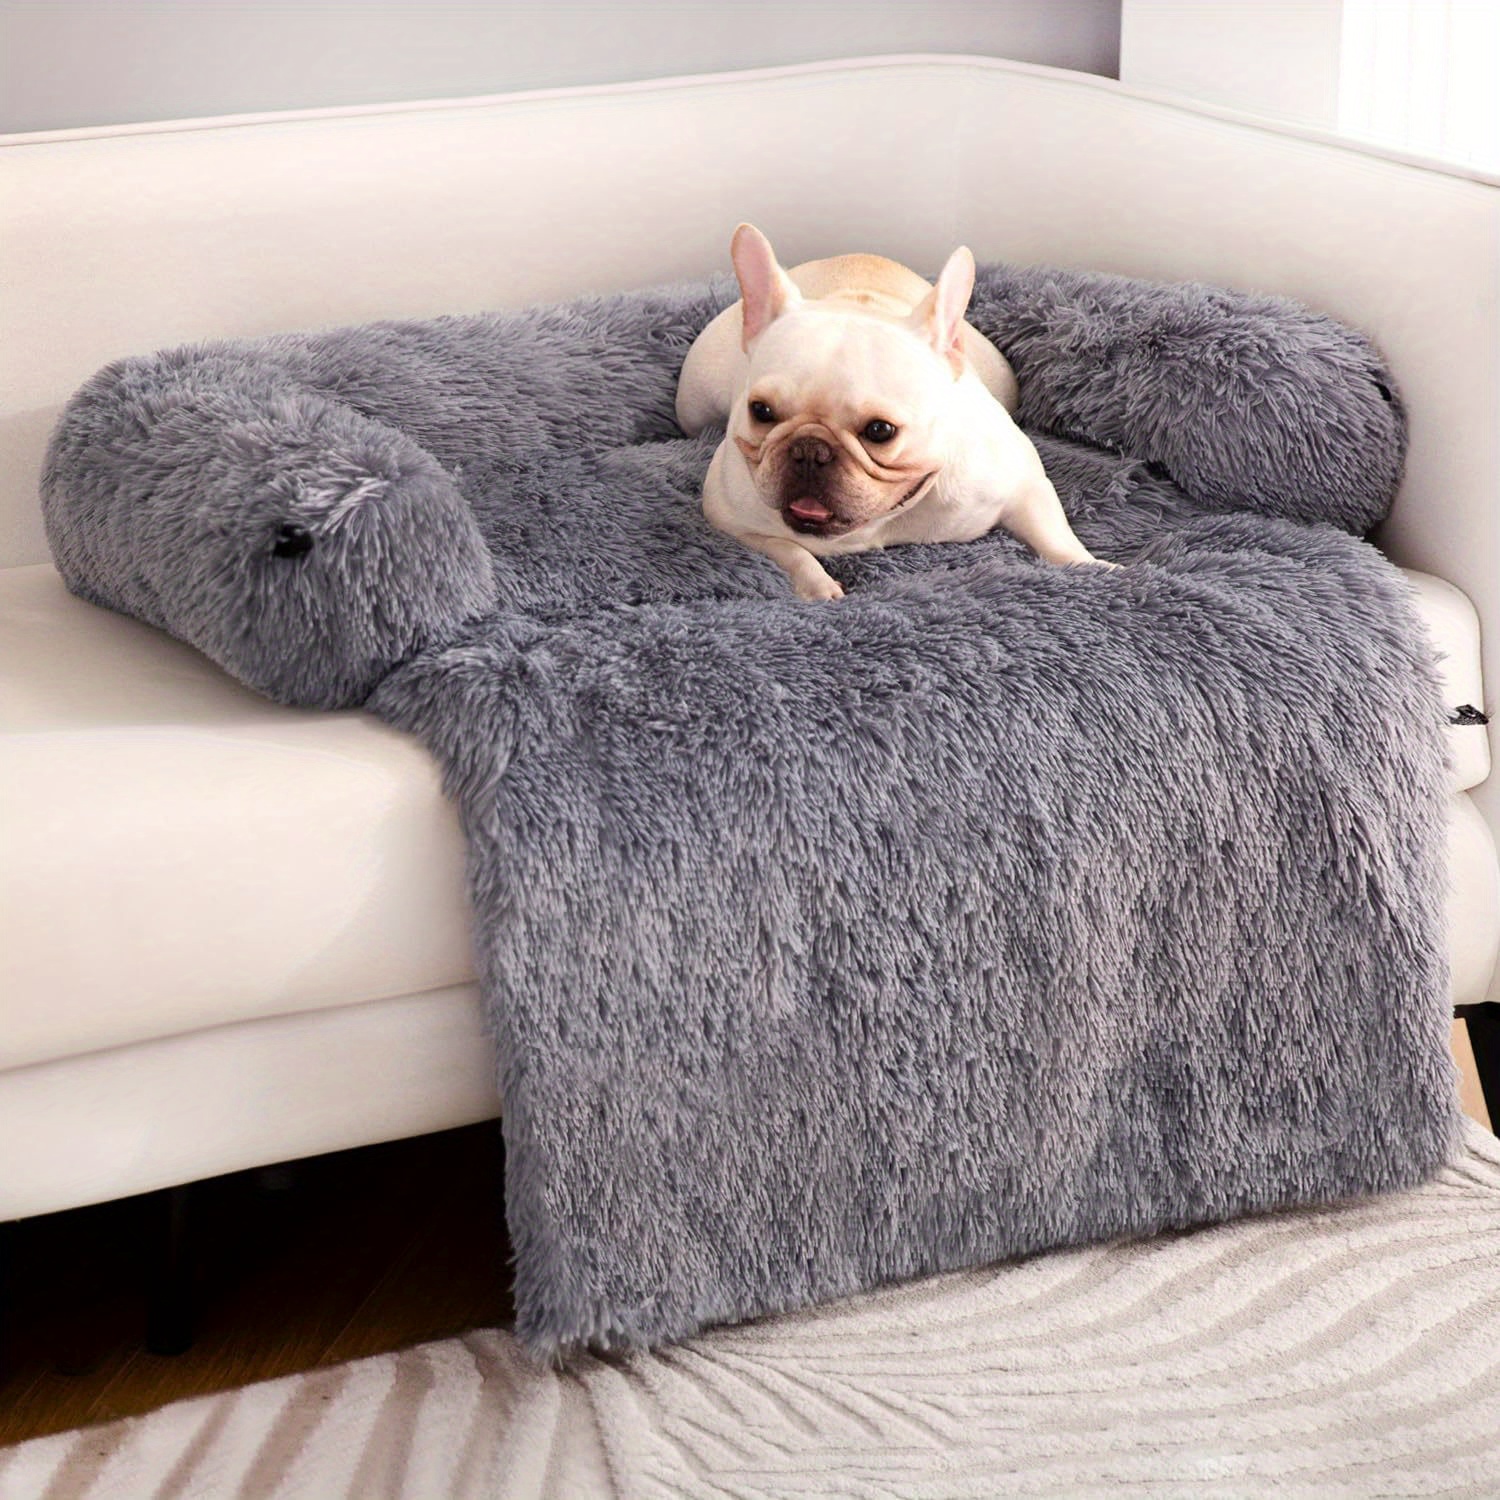 

1pc 4 In 1 Calming Dog Bed Mat - Pet Couch For Furniture Protector With Removable Washable Cover, Waterproof Anti-slip Fluffy Plush Dog Sofa Bed